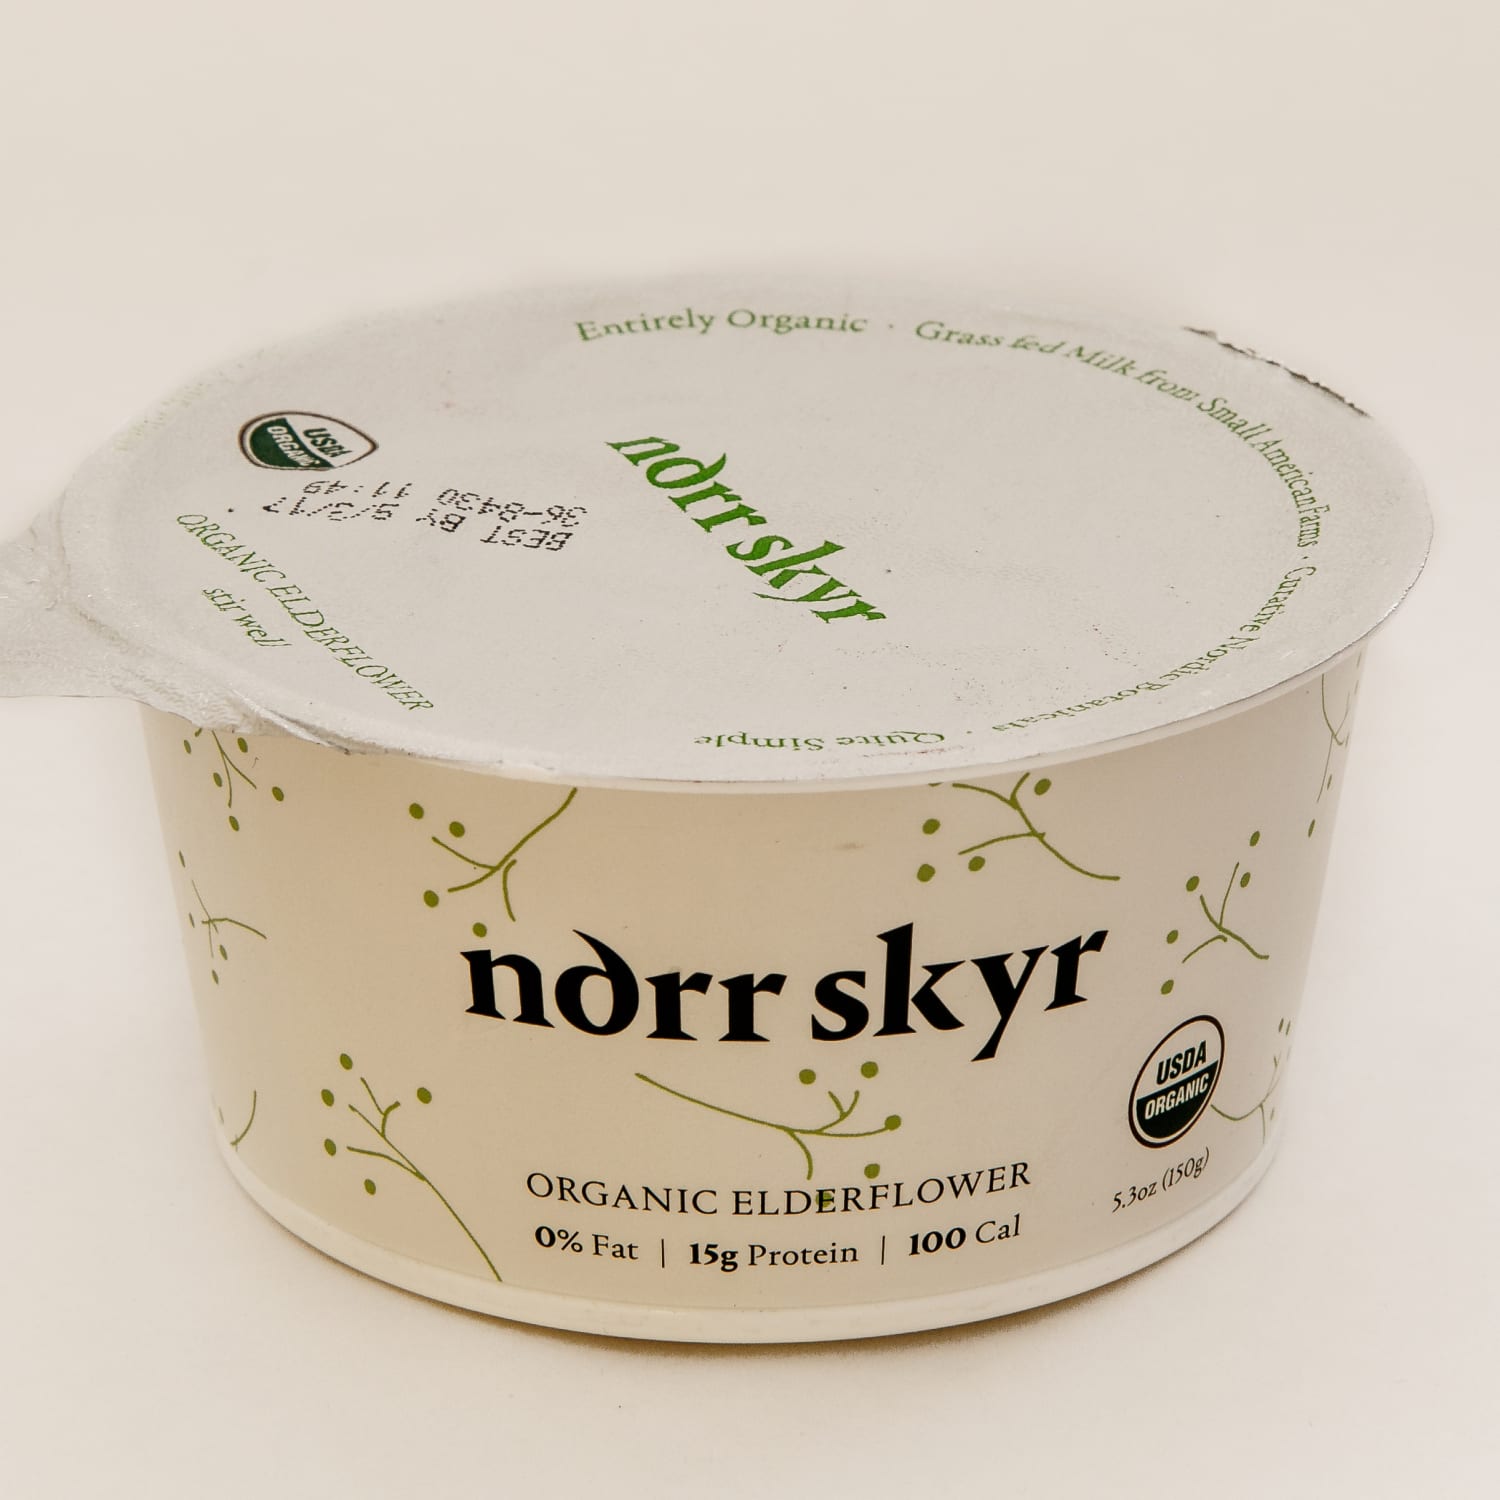 This Is How Iceland Really Does Skyr